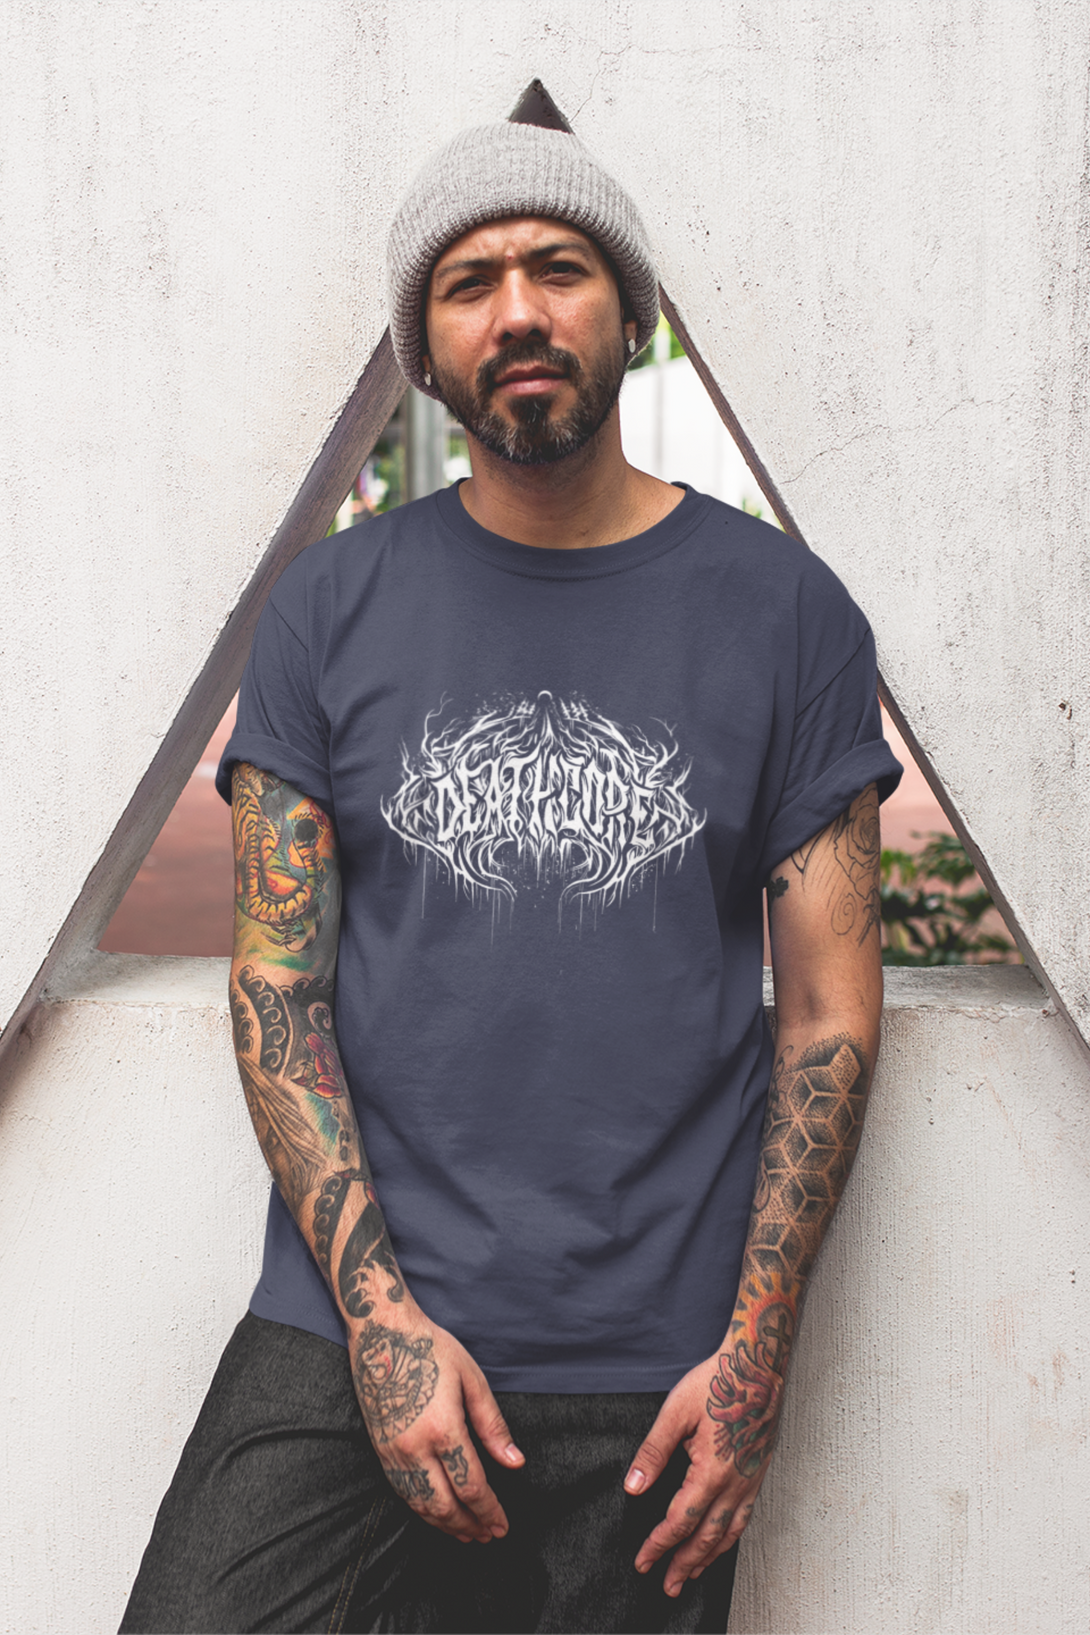 Gothic Deathcore Printed T-Shirt For Men - WowWaves - 5